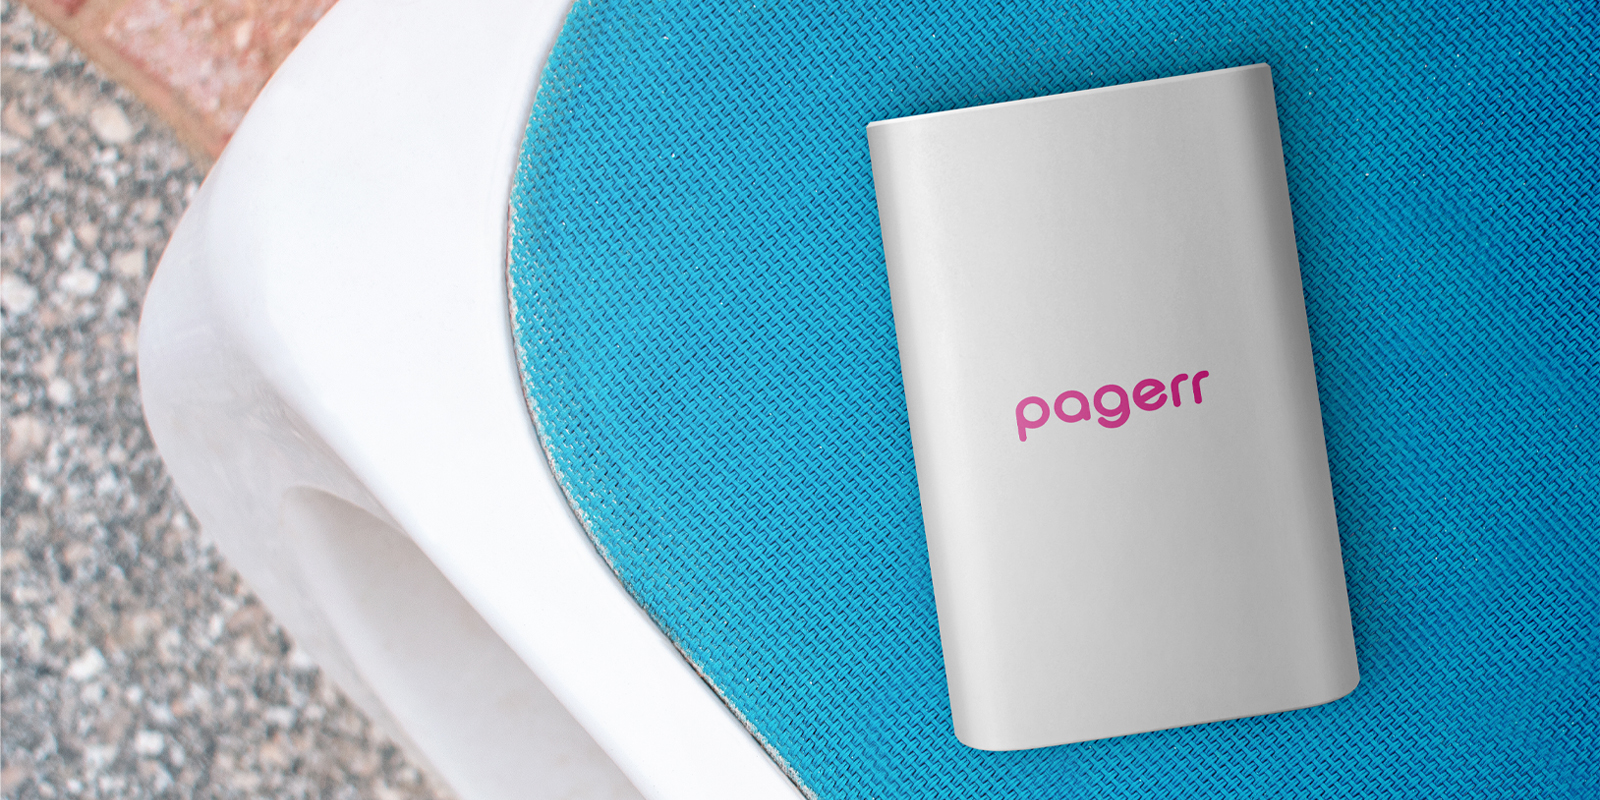 Chargers & power banks in Logan City - Print with Pagerr